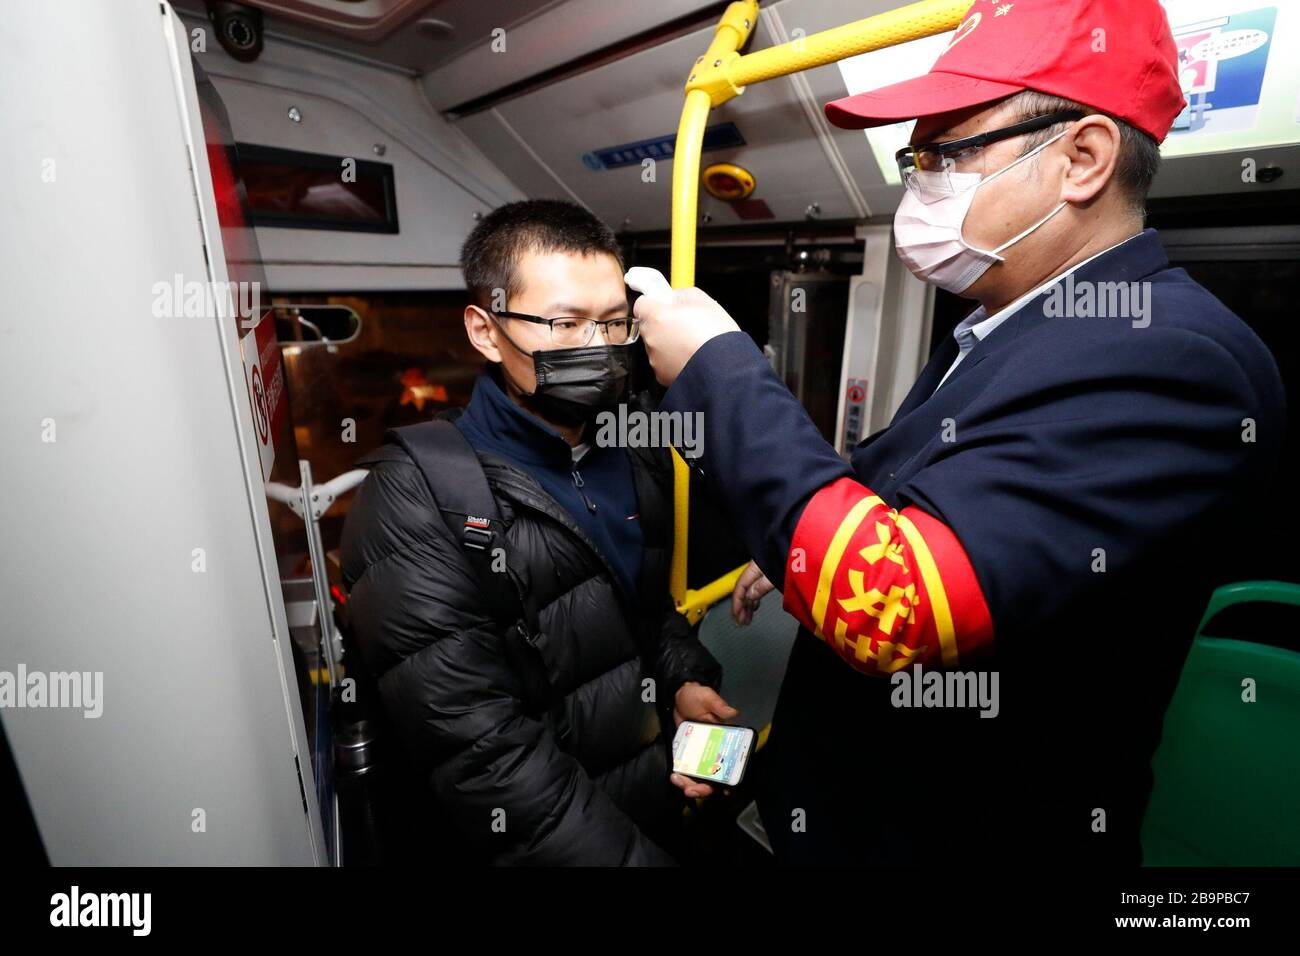 (200325) -- WUHAN, March 25, 2020 (Xinhua) -- A staff checks a passenger's body temperature on a bus in Wuhan, central China's Hubei Province, March 25, 2020. Wuhan, the once hardest-hit city in central China's Hubei Province during the COVID-19 outbreak, resumed a total of 117 bus routes starting Wednesday, around 30 percent of the city's total bus transport capacity, the municipal transport bureau said. According to a spokesperson of the bureau, passengers must wear masks, register with their names and scan a QR code, and take a temperature check before taking buses and subways. (Xinhua/Sh Stock Photo